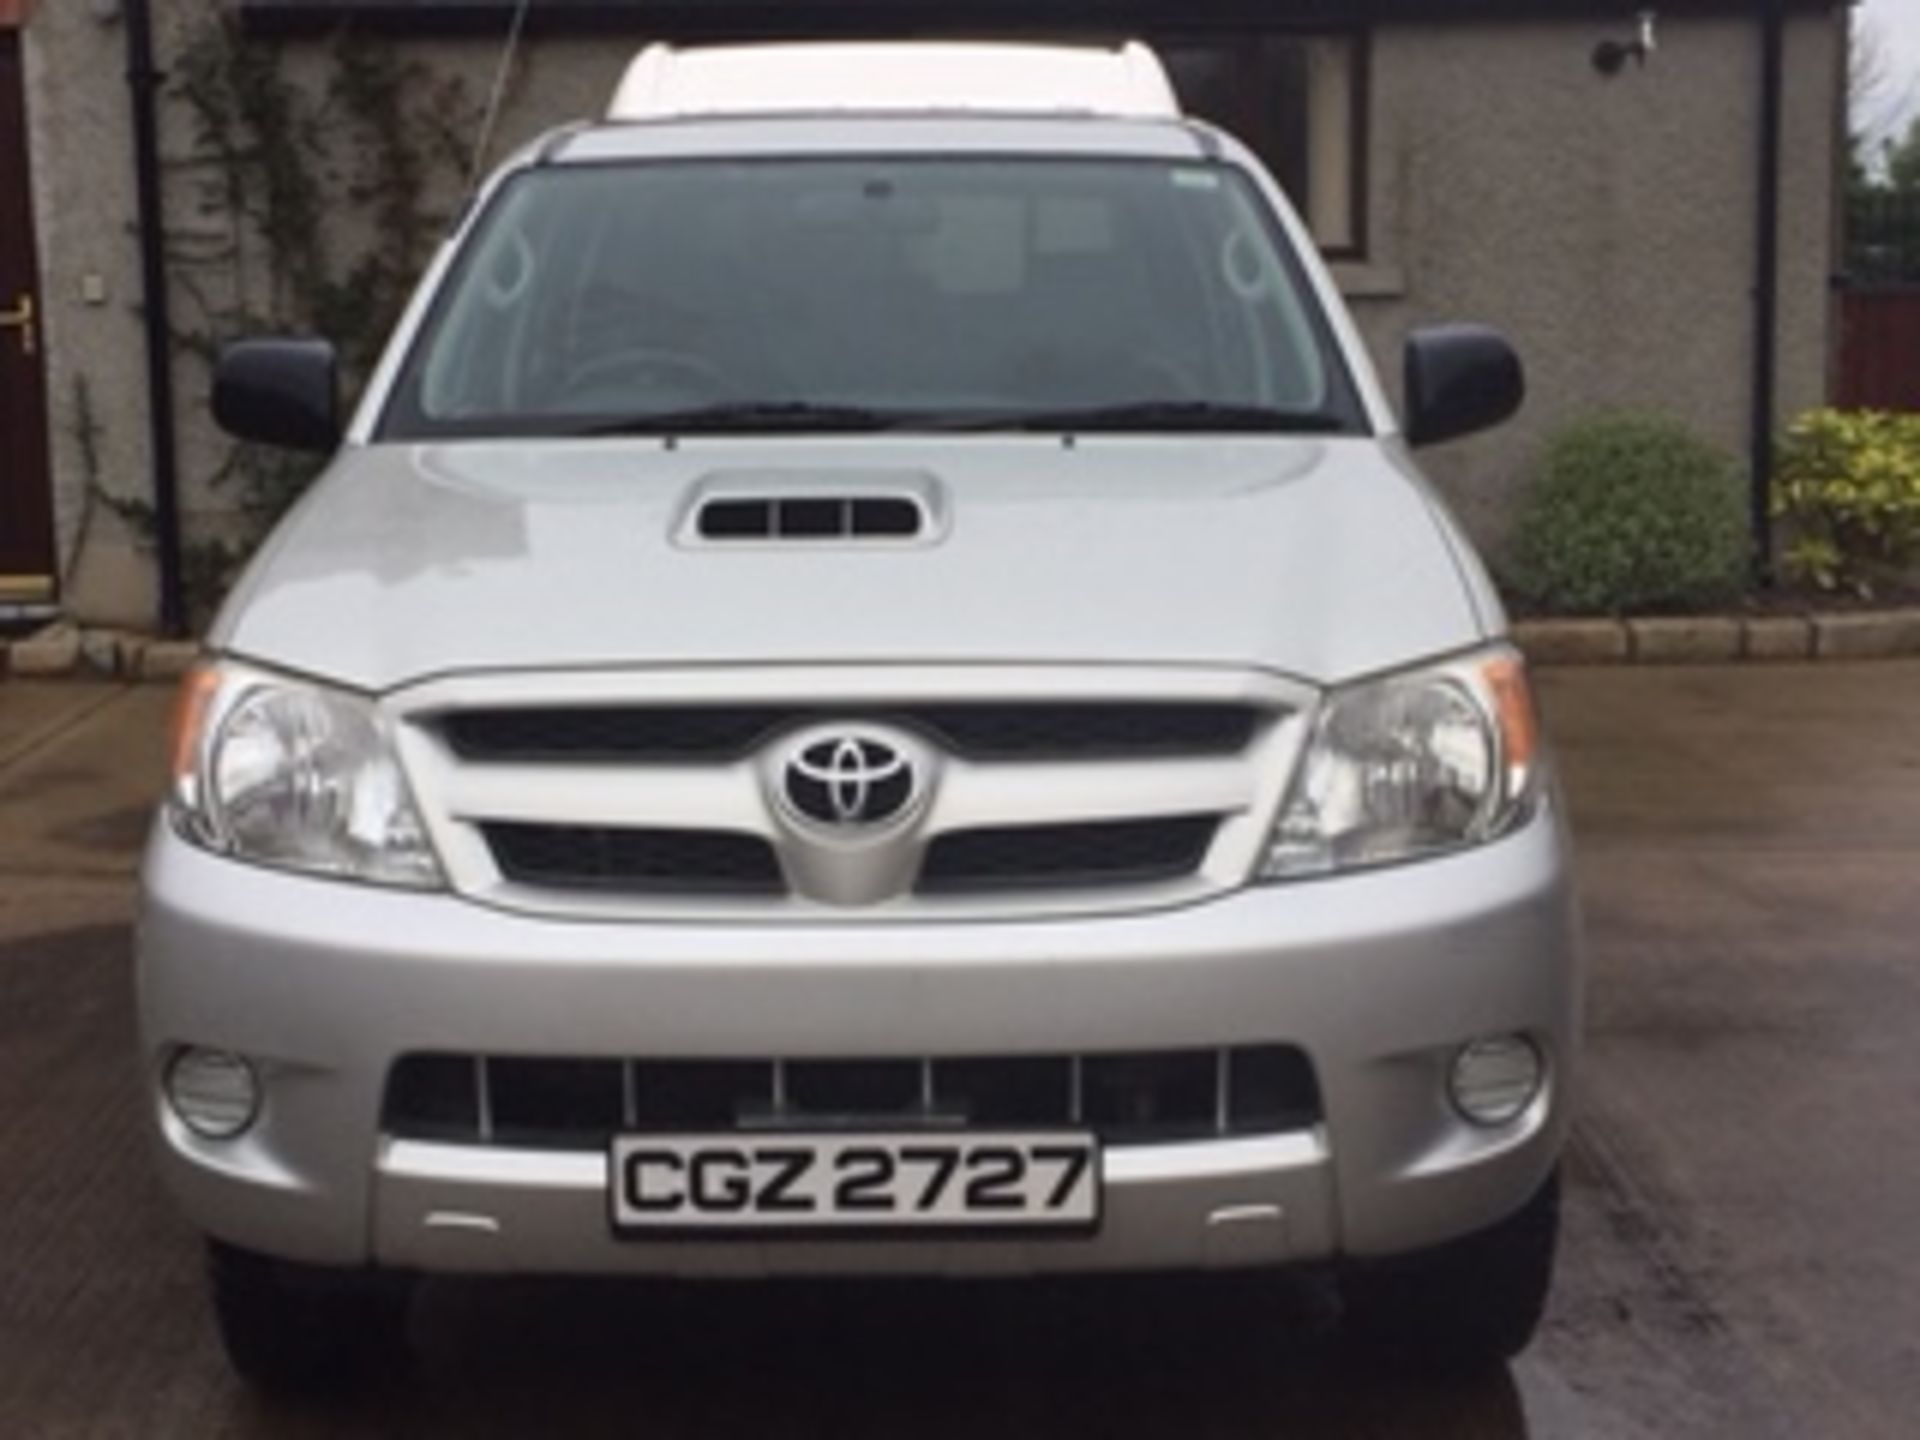 2008 (Feb) Toyota Hilux Double Cab Pickup c/w Canopy, 63000 miles Reg - CGZ 2727 - Image 4 of 6